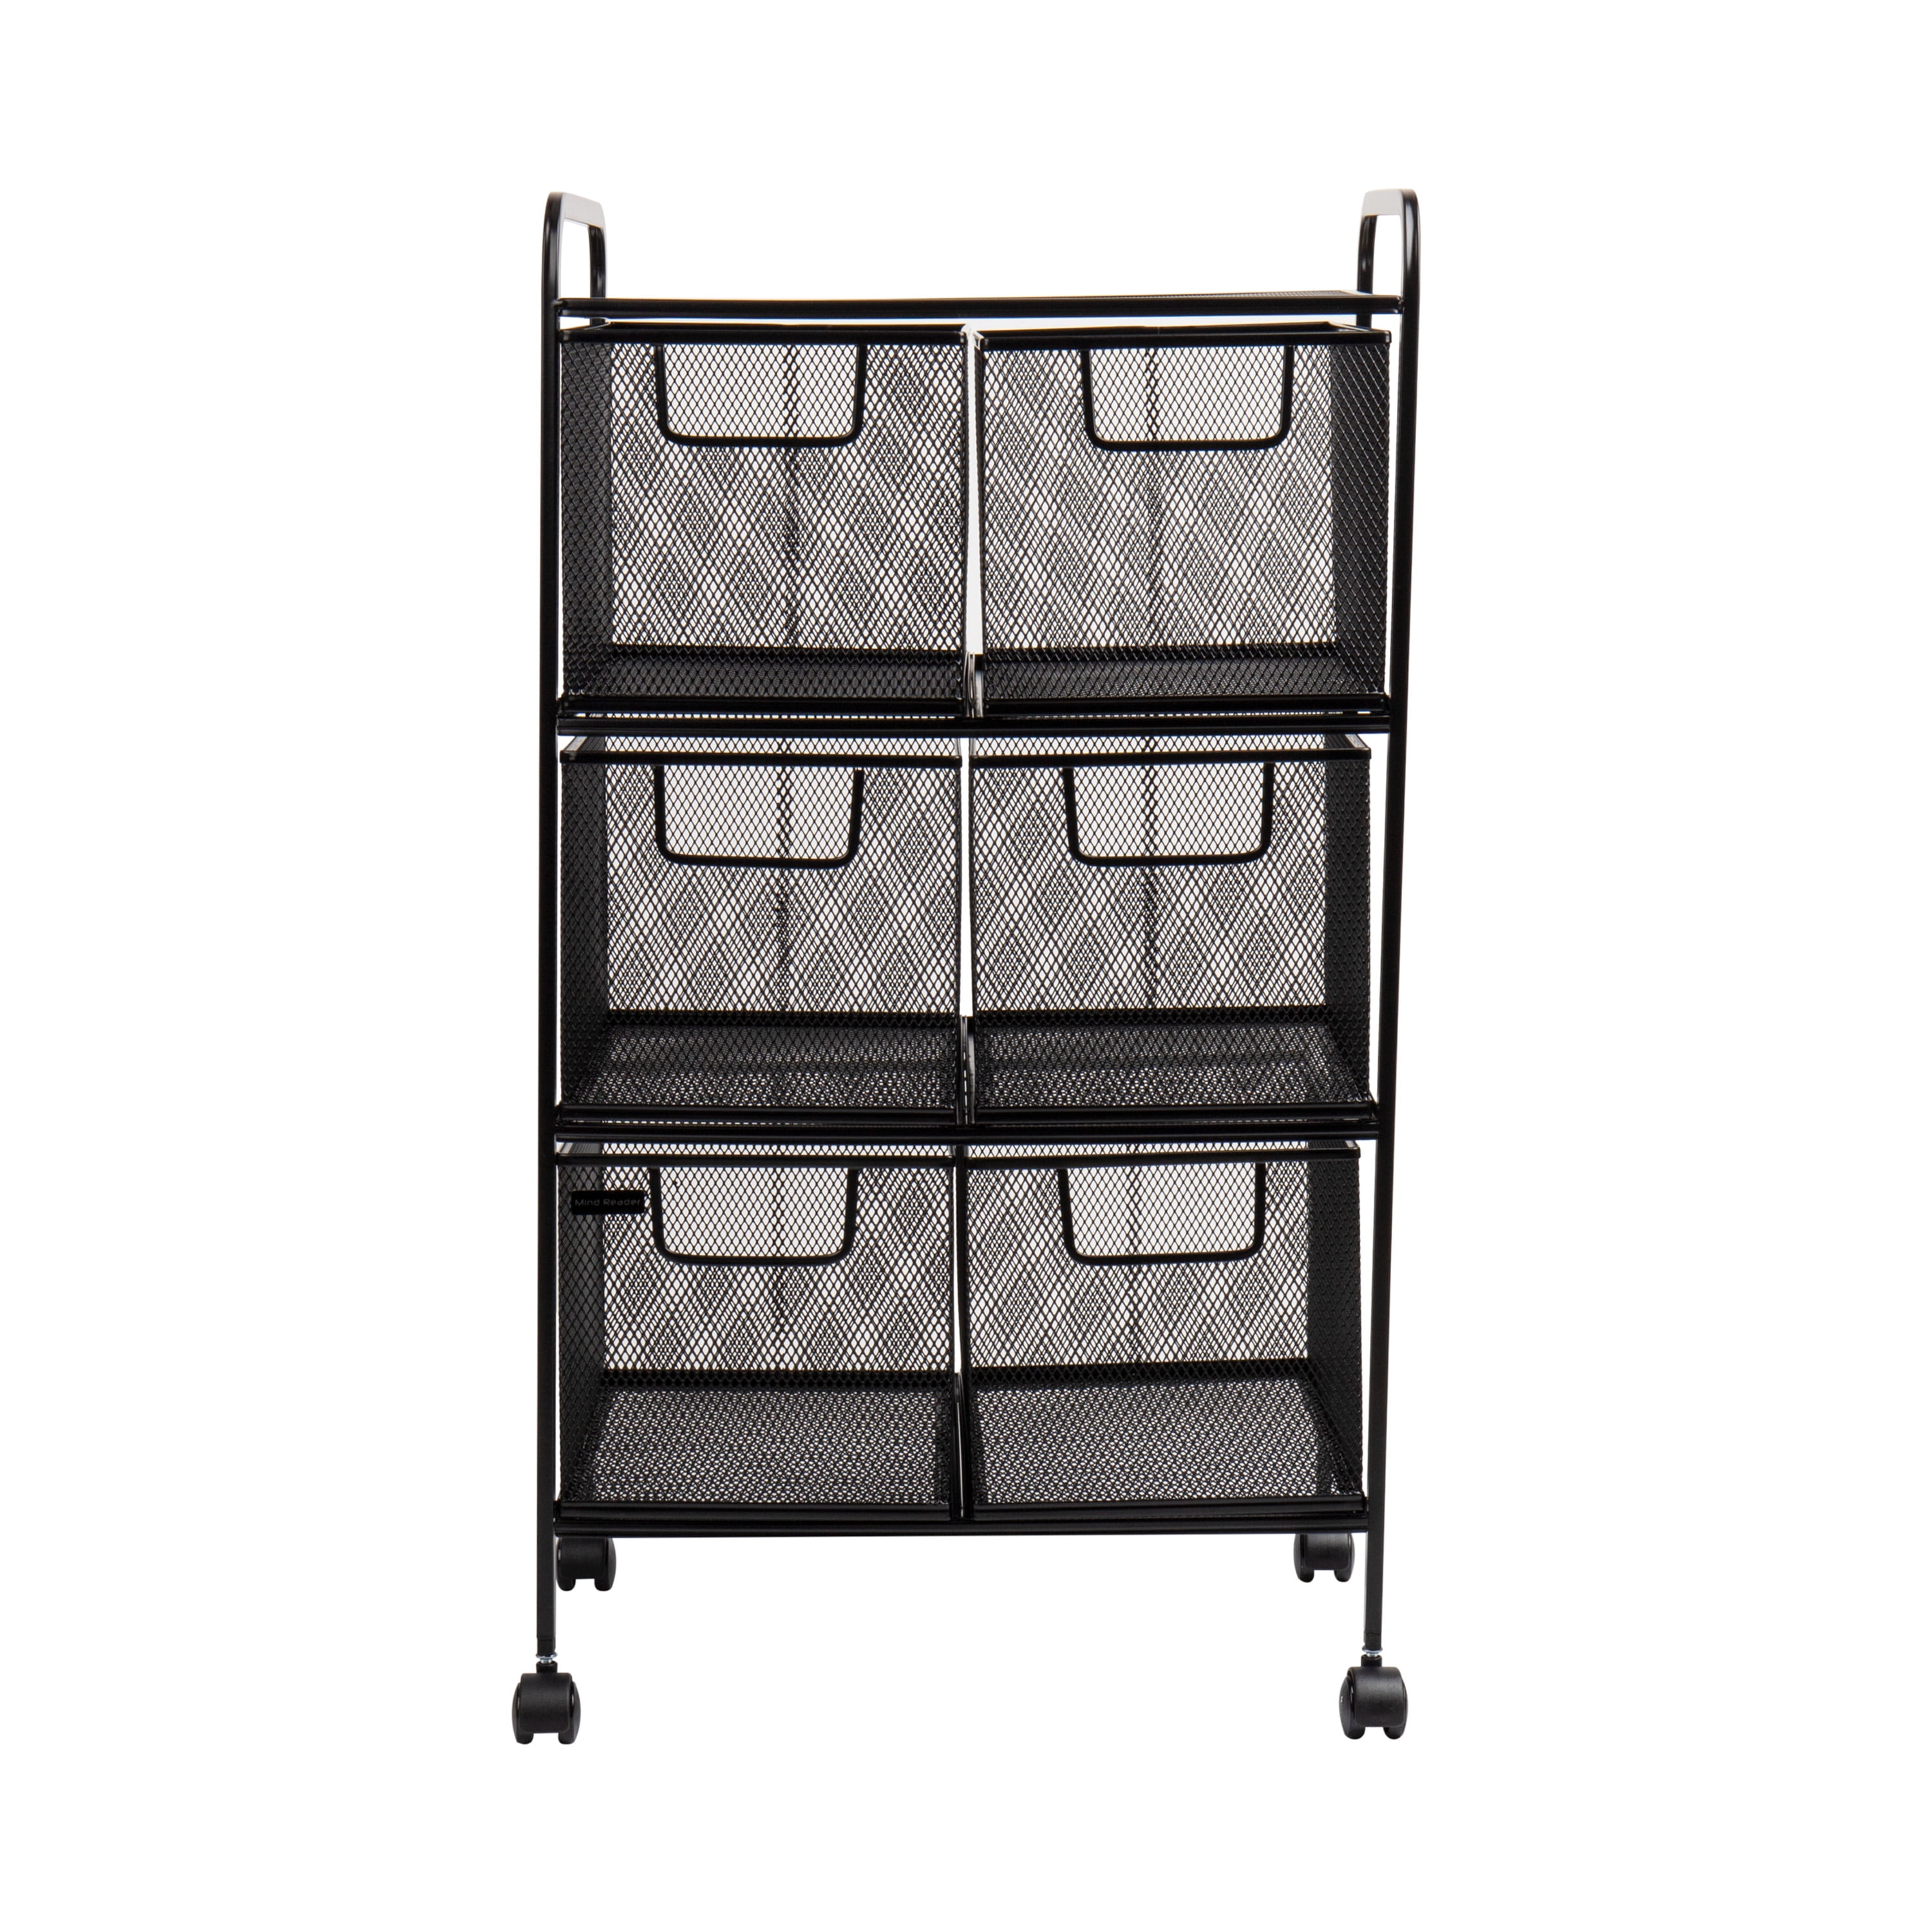 LALA 4-DRAWER WIRE STEEL MOBILE STORAGE CART WITH TOP SHELF  NEW IN BOX! 